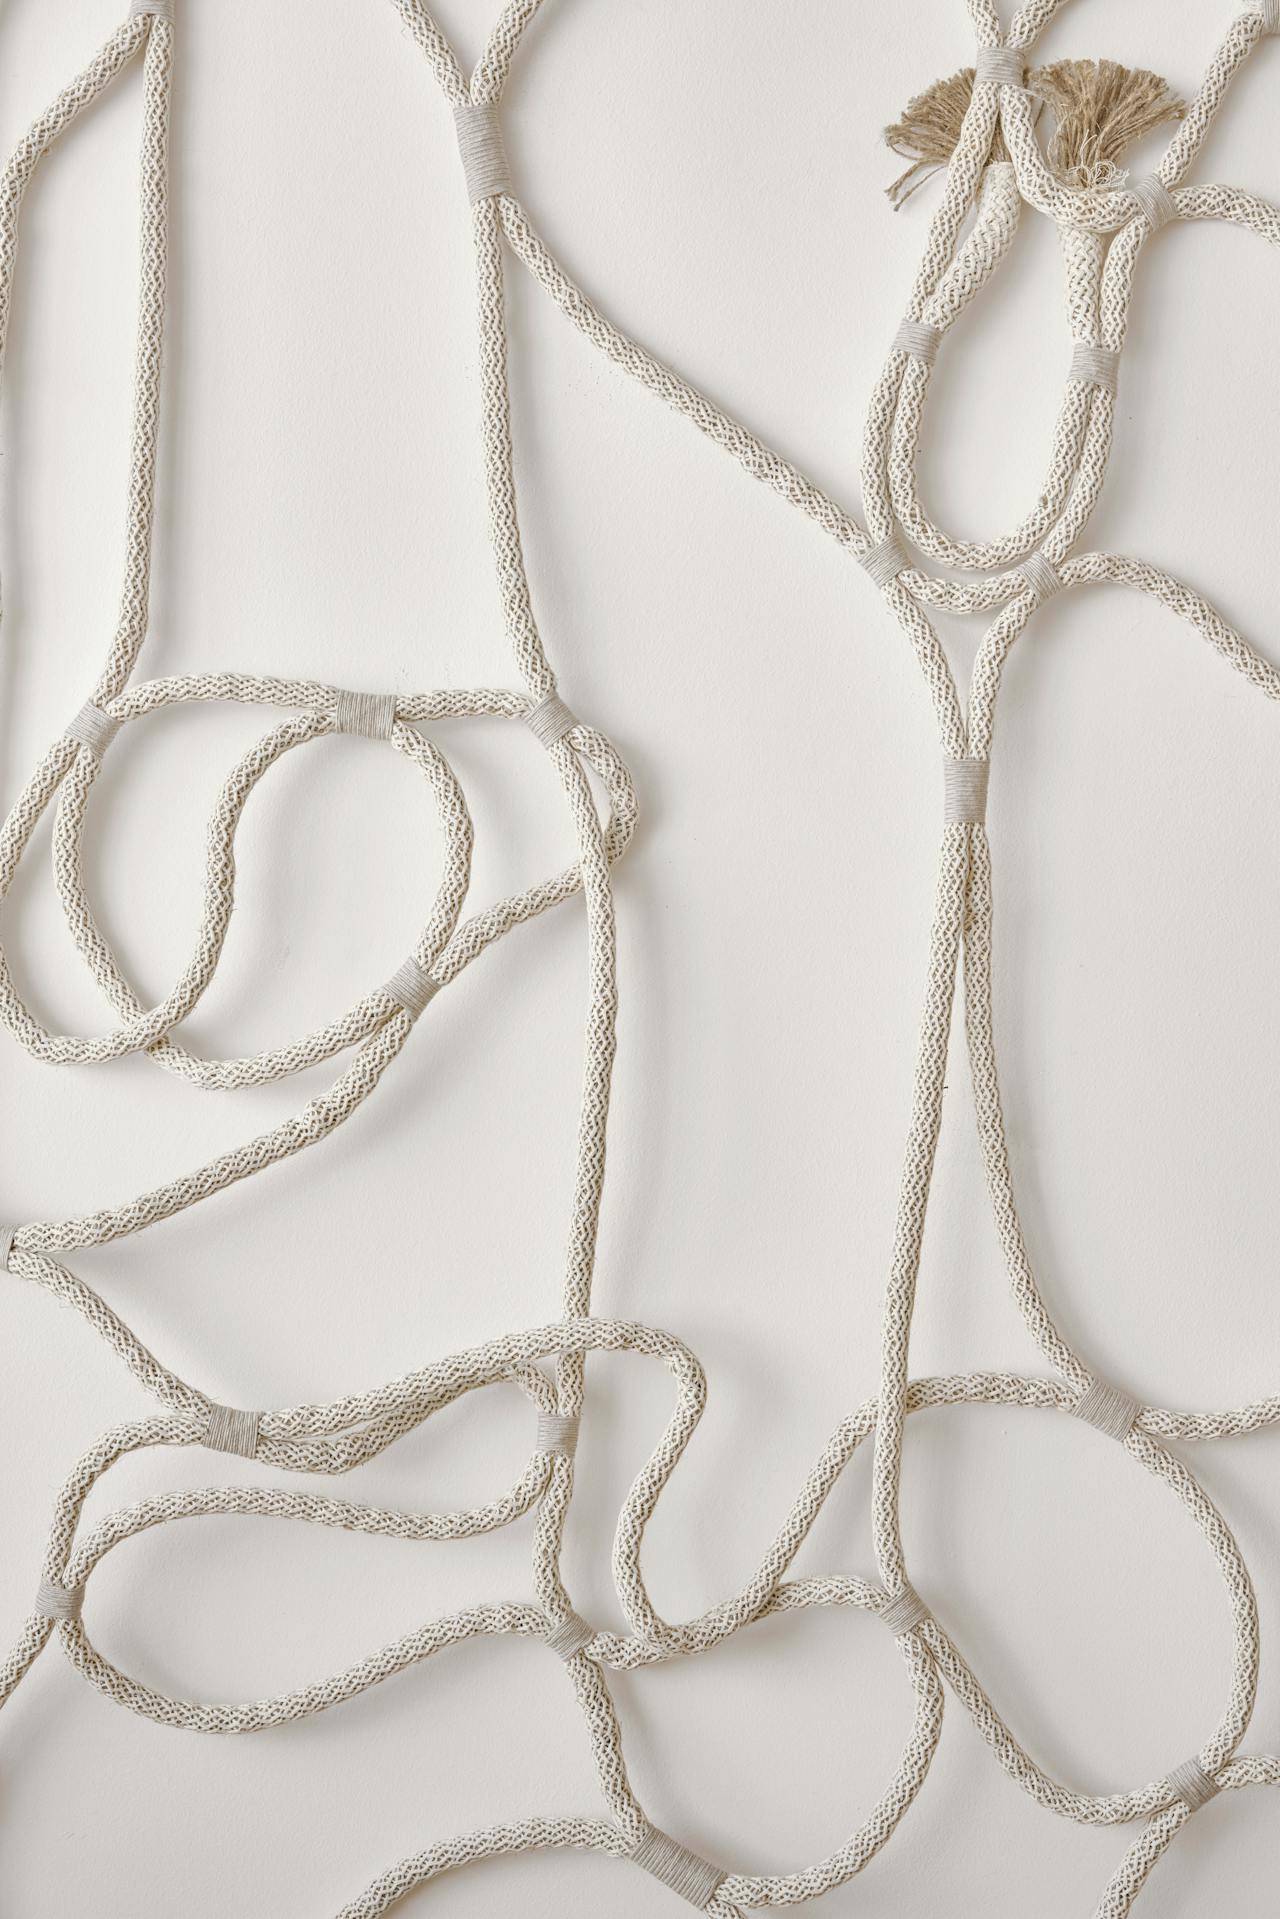 Photo by cocarinne : https://www.pexels.com/photo/tied-rope-decorating-light-wall-in-room-7260273/